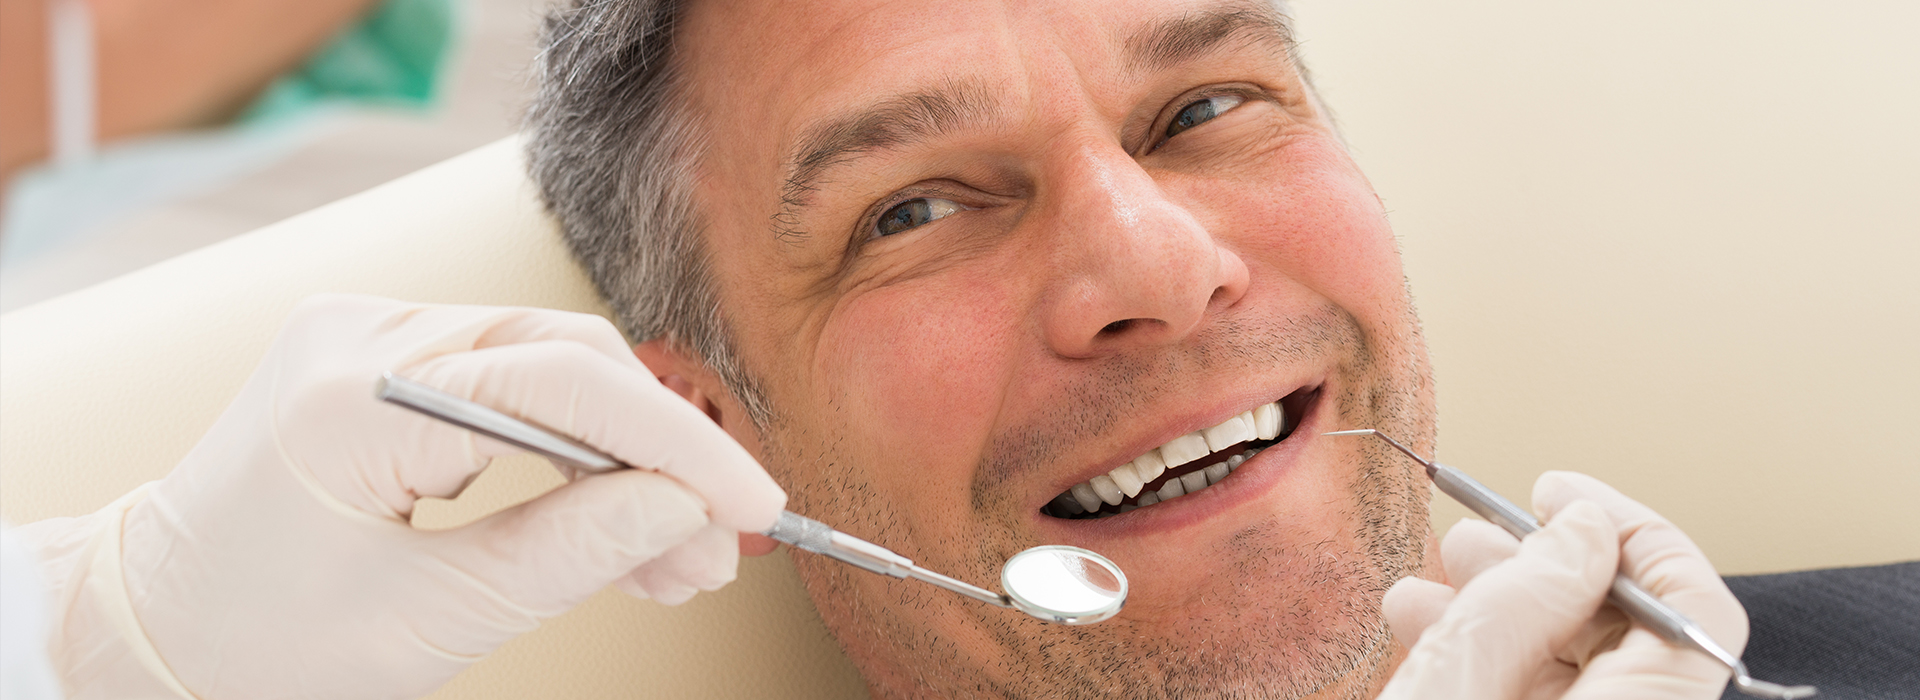 Cameron Park Dental Care | Night Guards, Dental Fillings and Teeth Whitening